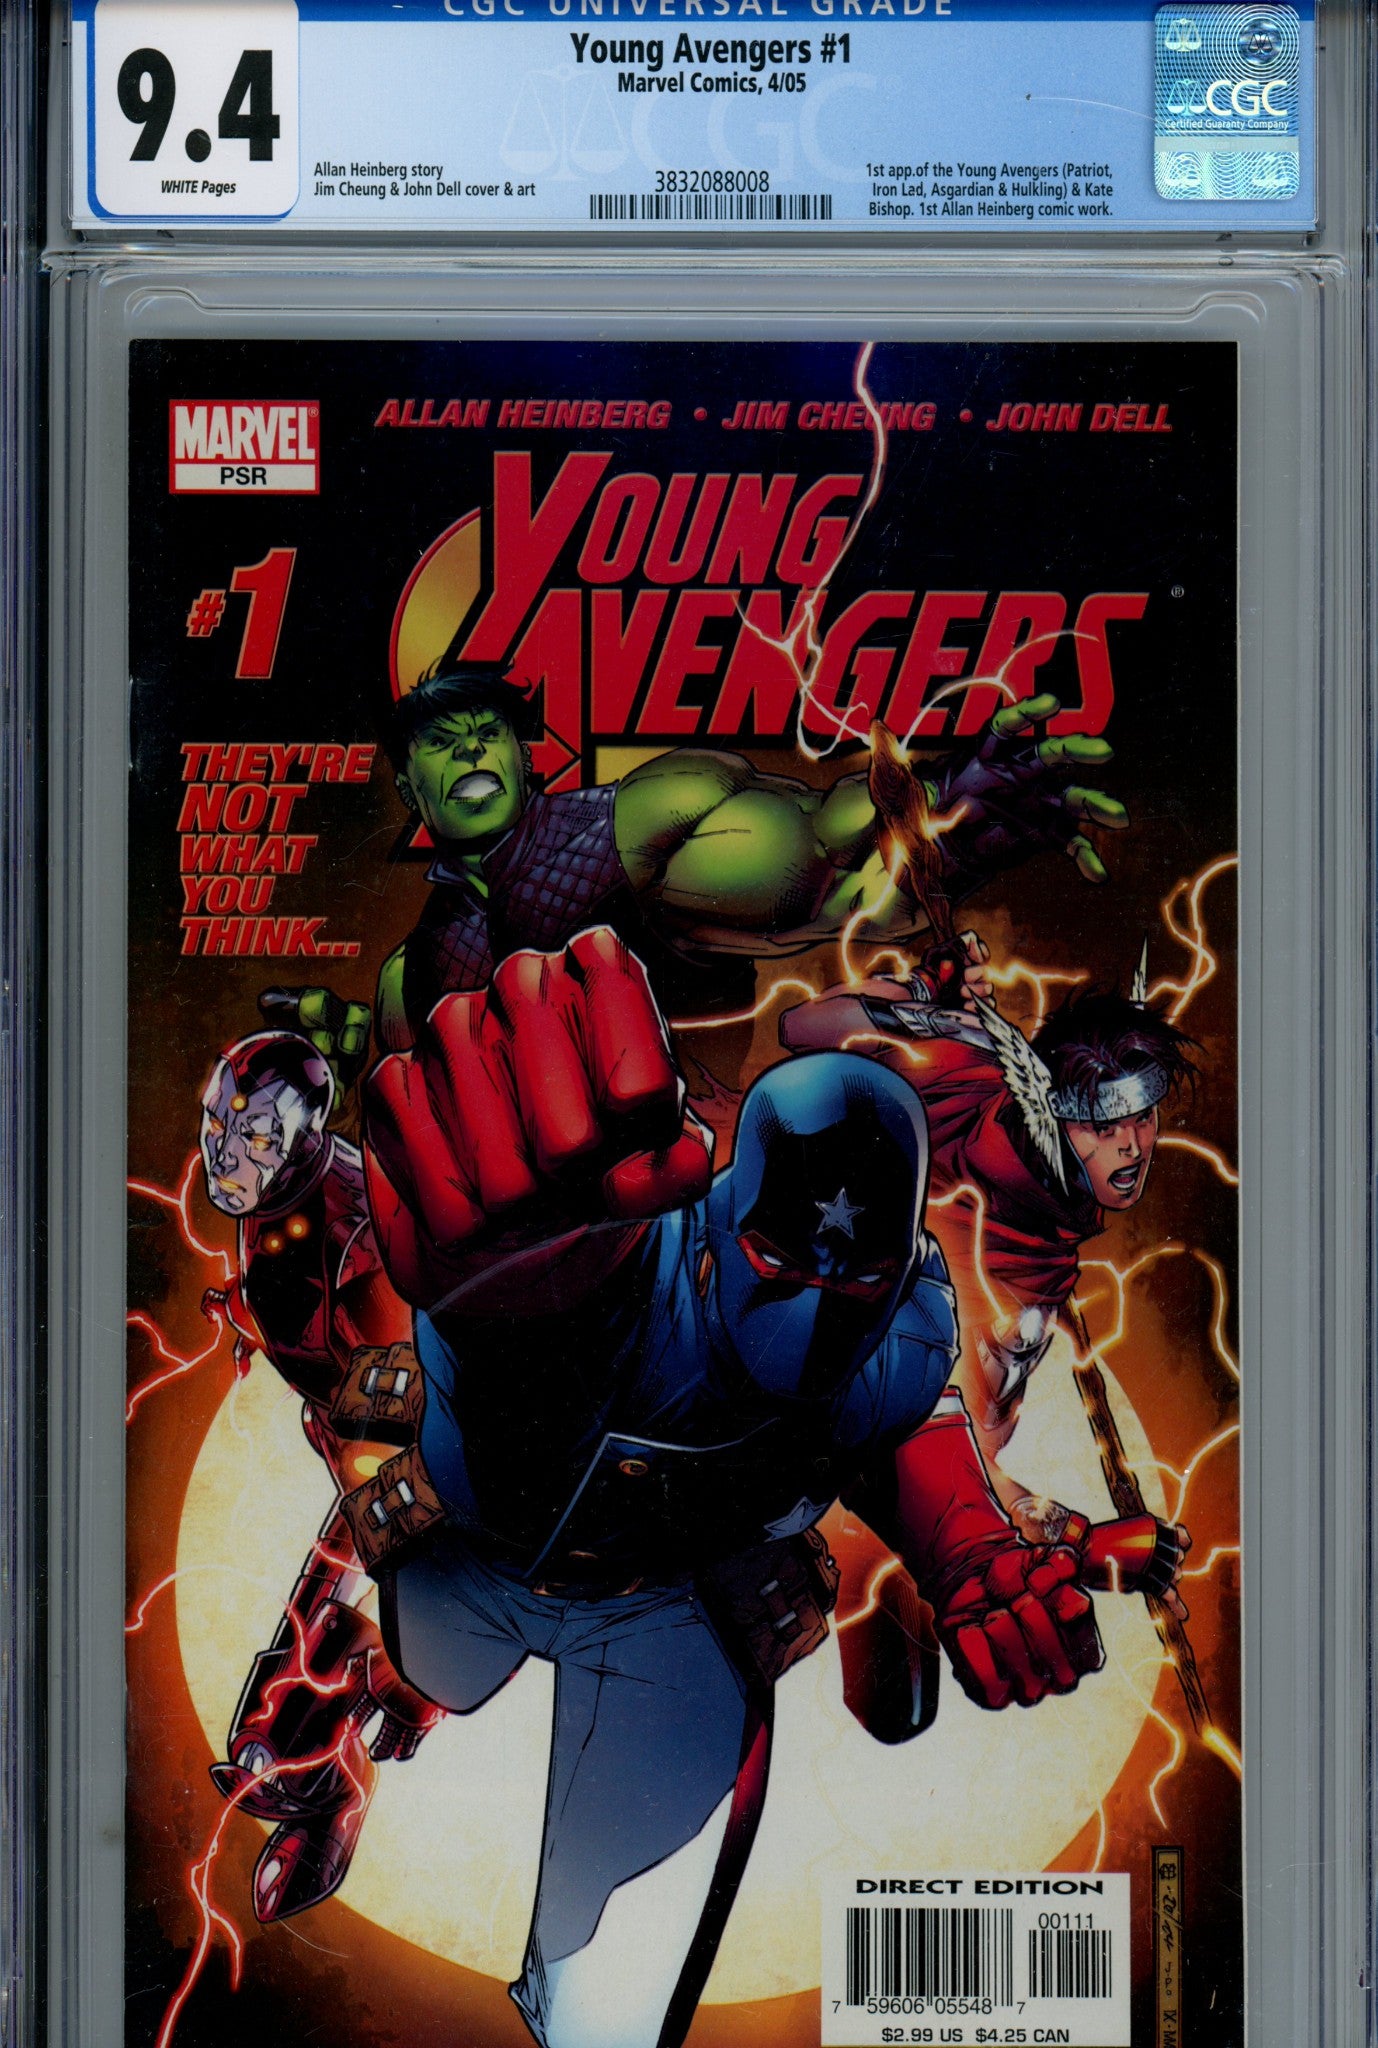 Young Avengers Vol 1 1 CGC 9.4 (2005)